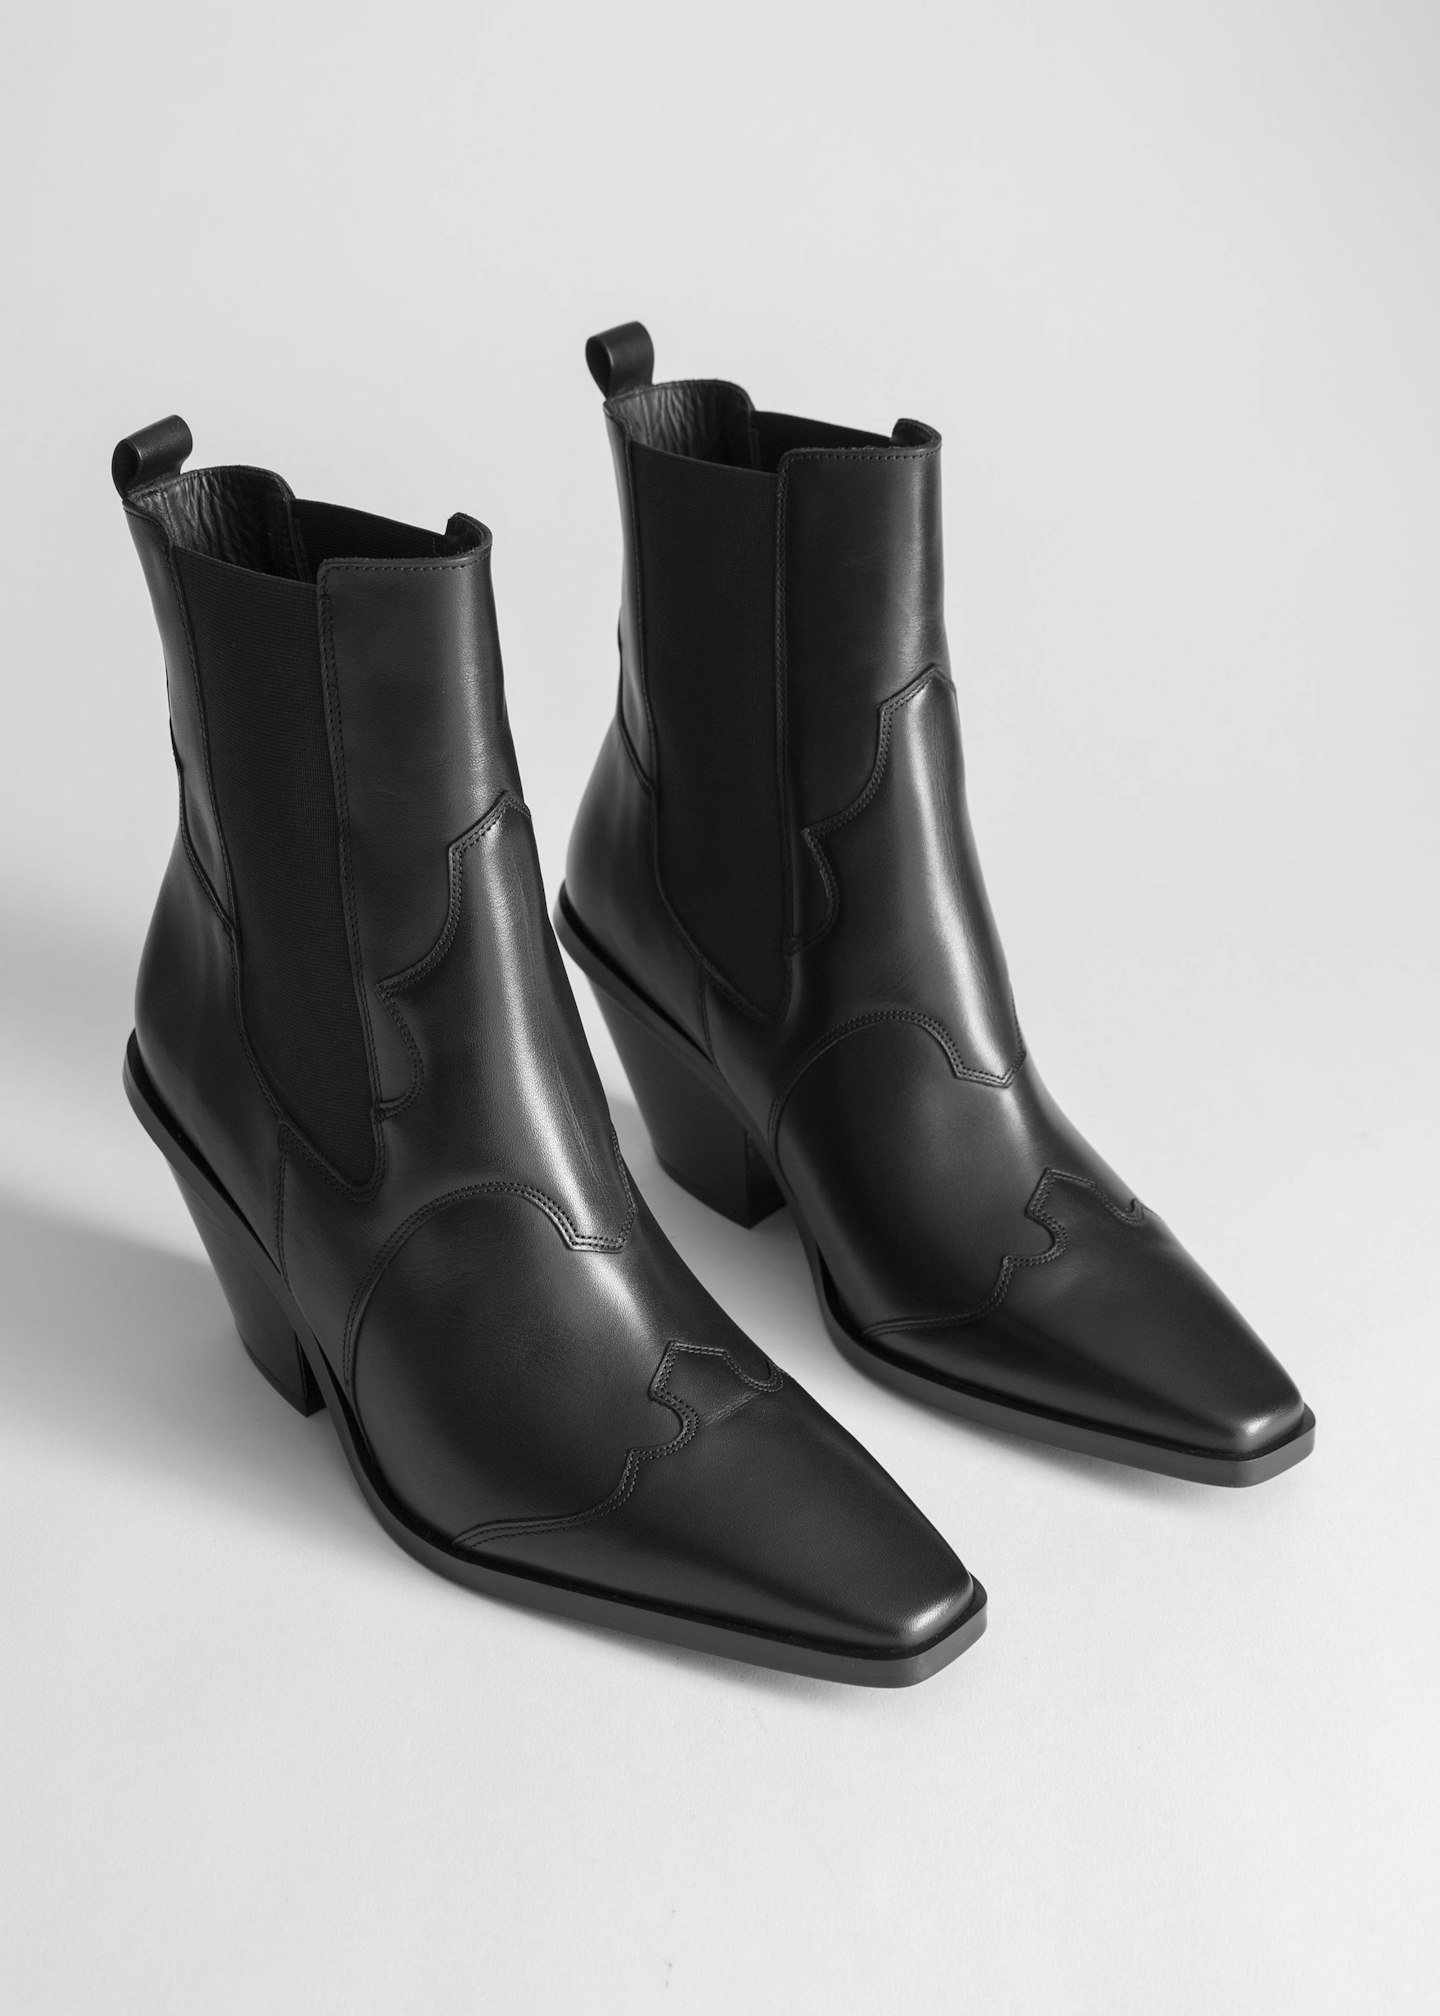 & Other Stories, Square Toe Leather Cowboy Boots, £135